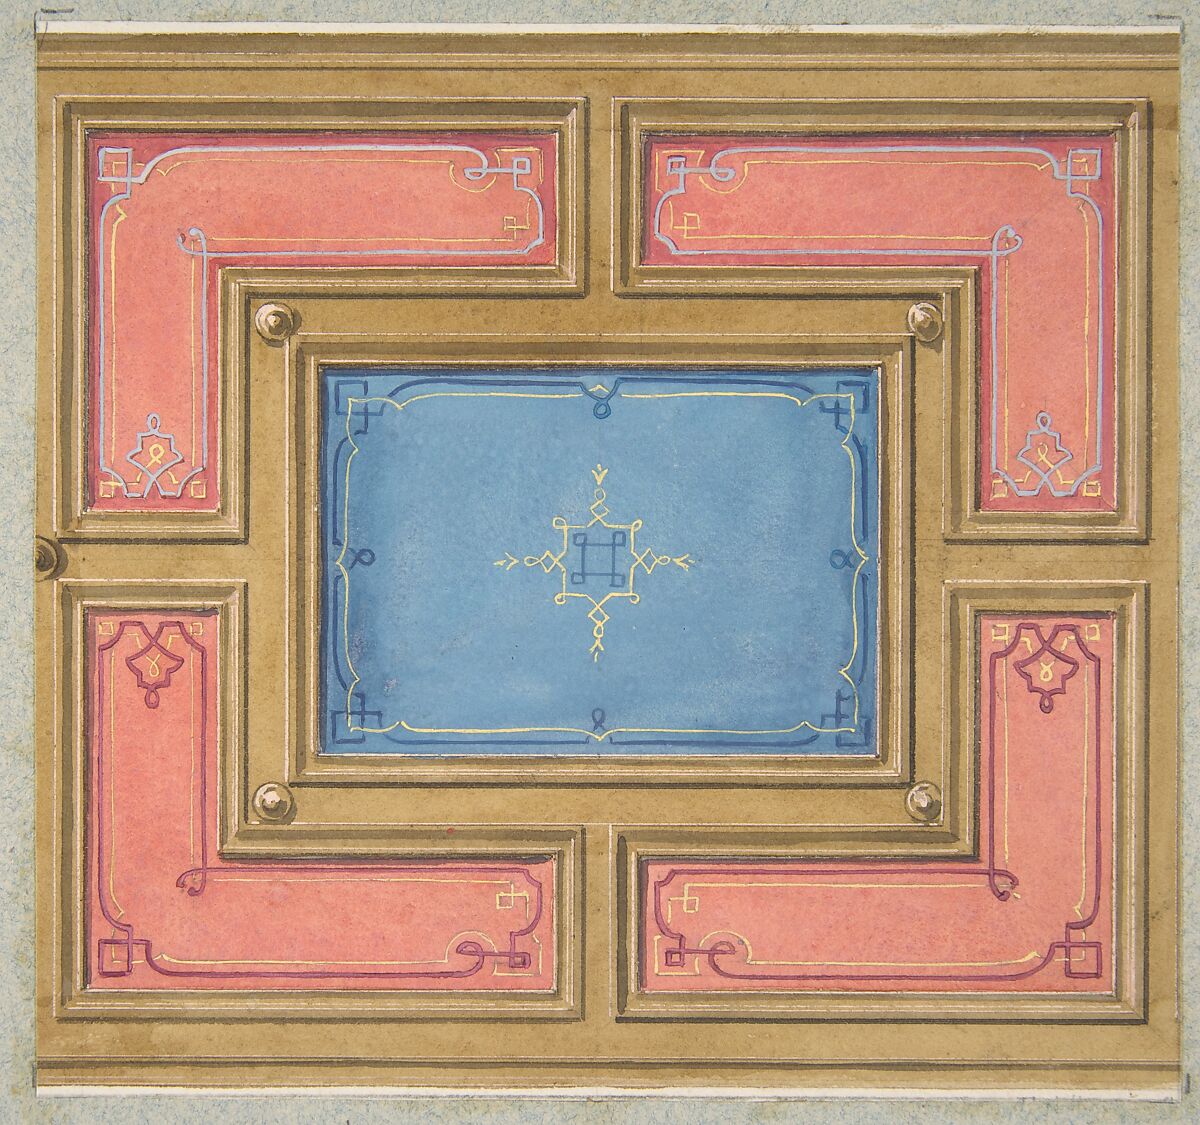 Design for a paneled ceiling, Jules-Edmond-Charles Lachaise (French, died 1897), pen and ink, watercolor, and gouache on wove paper; inlaid in blue wove paper 